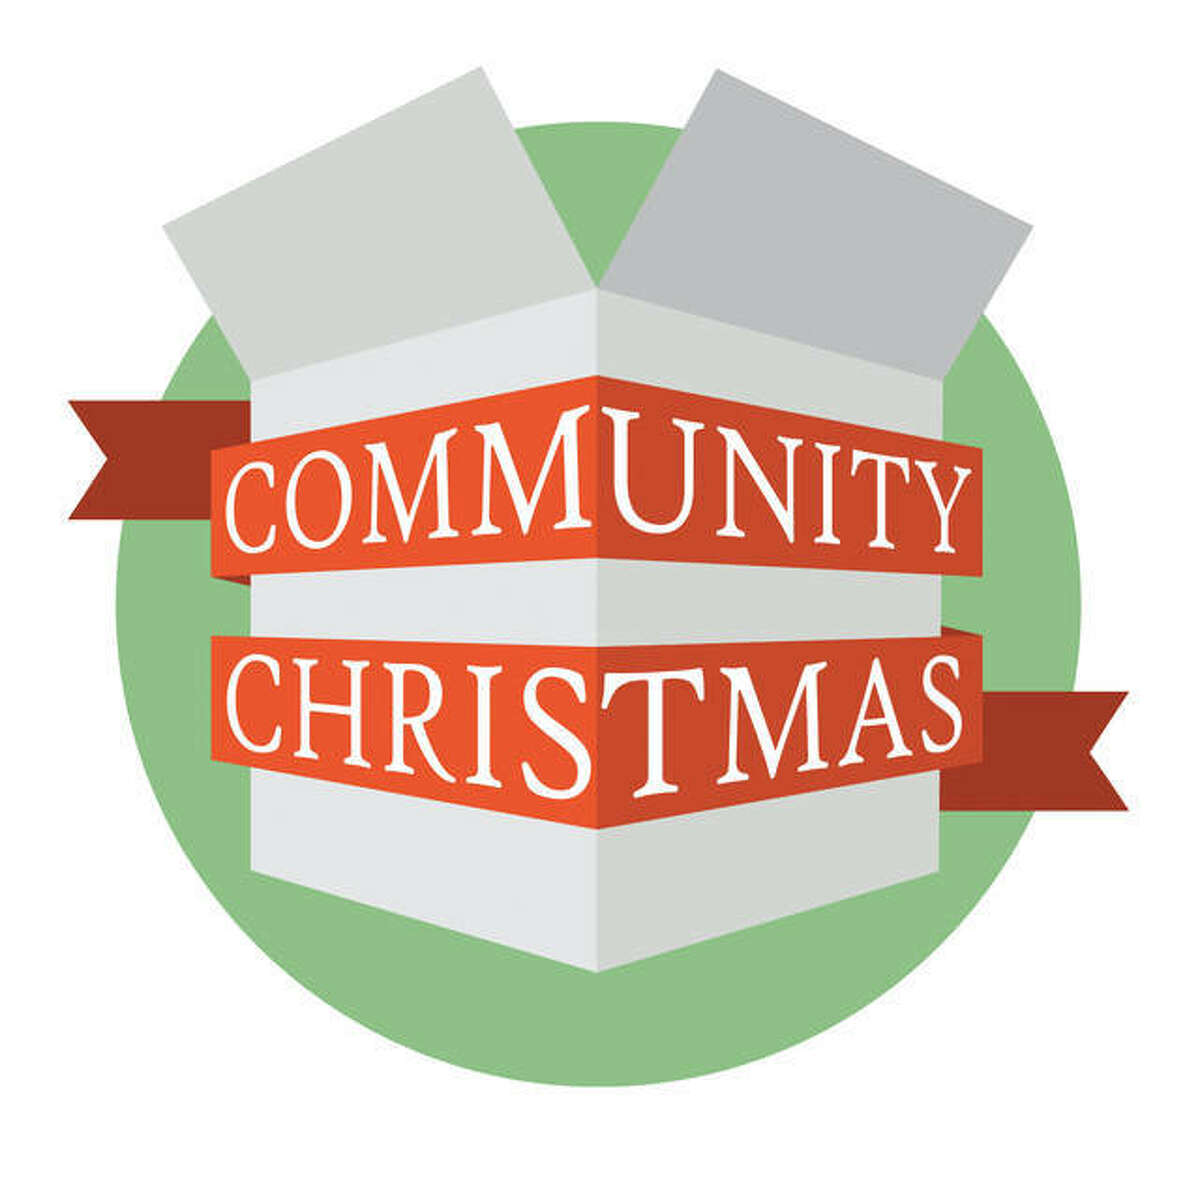 Community Christmas boxes will be picked up in early December from host locations.